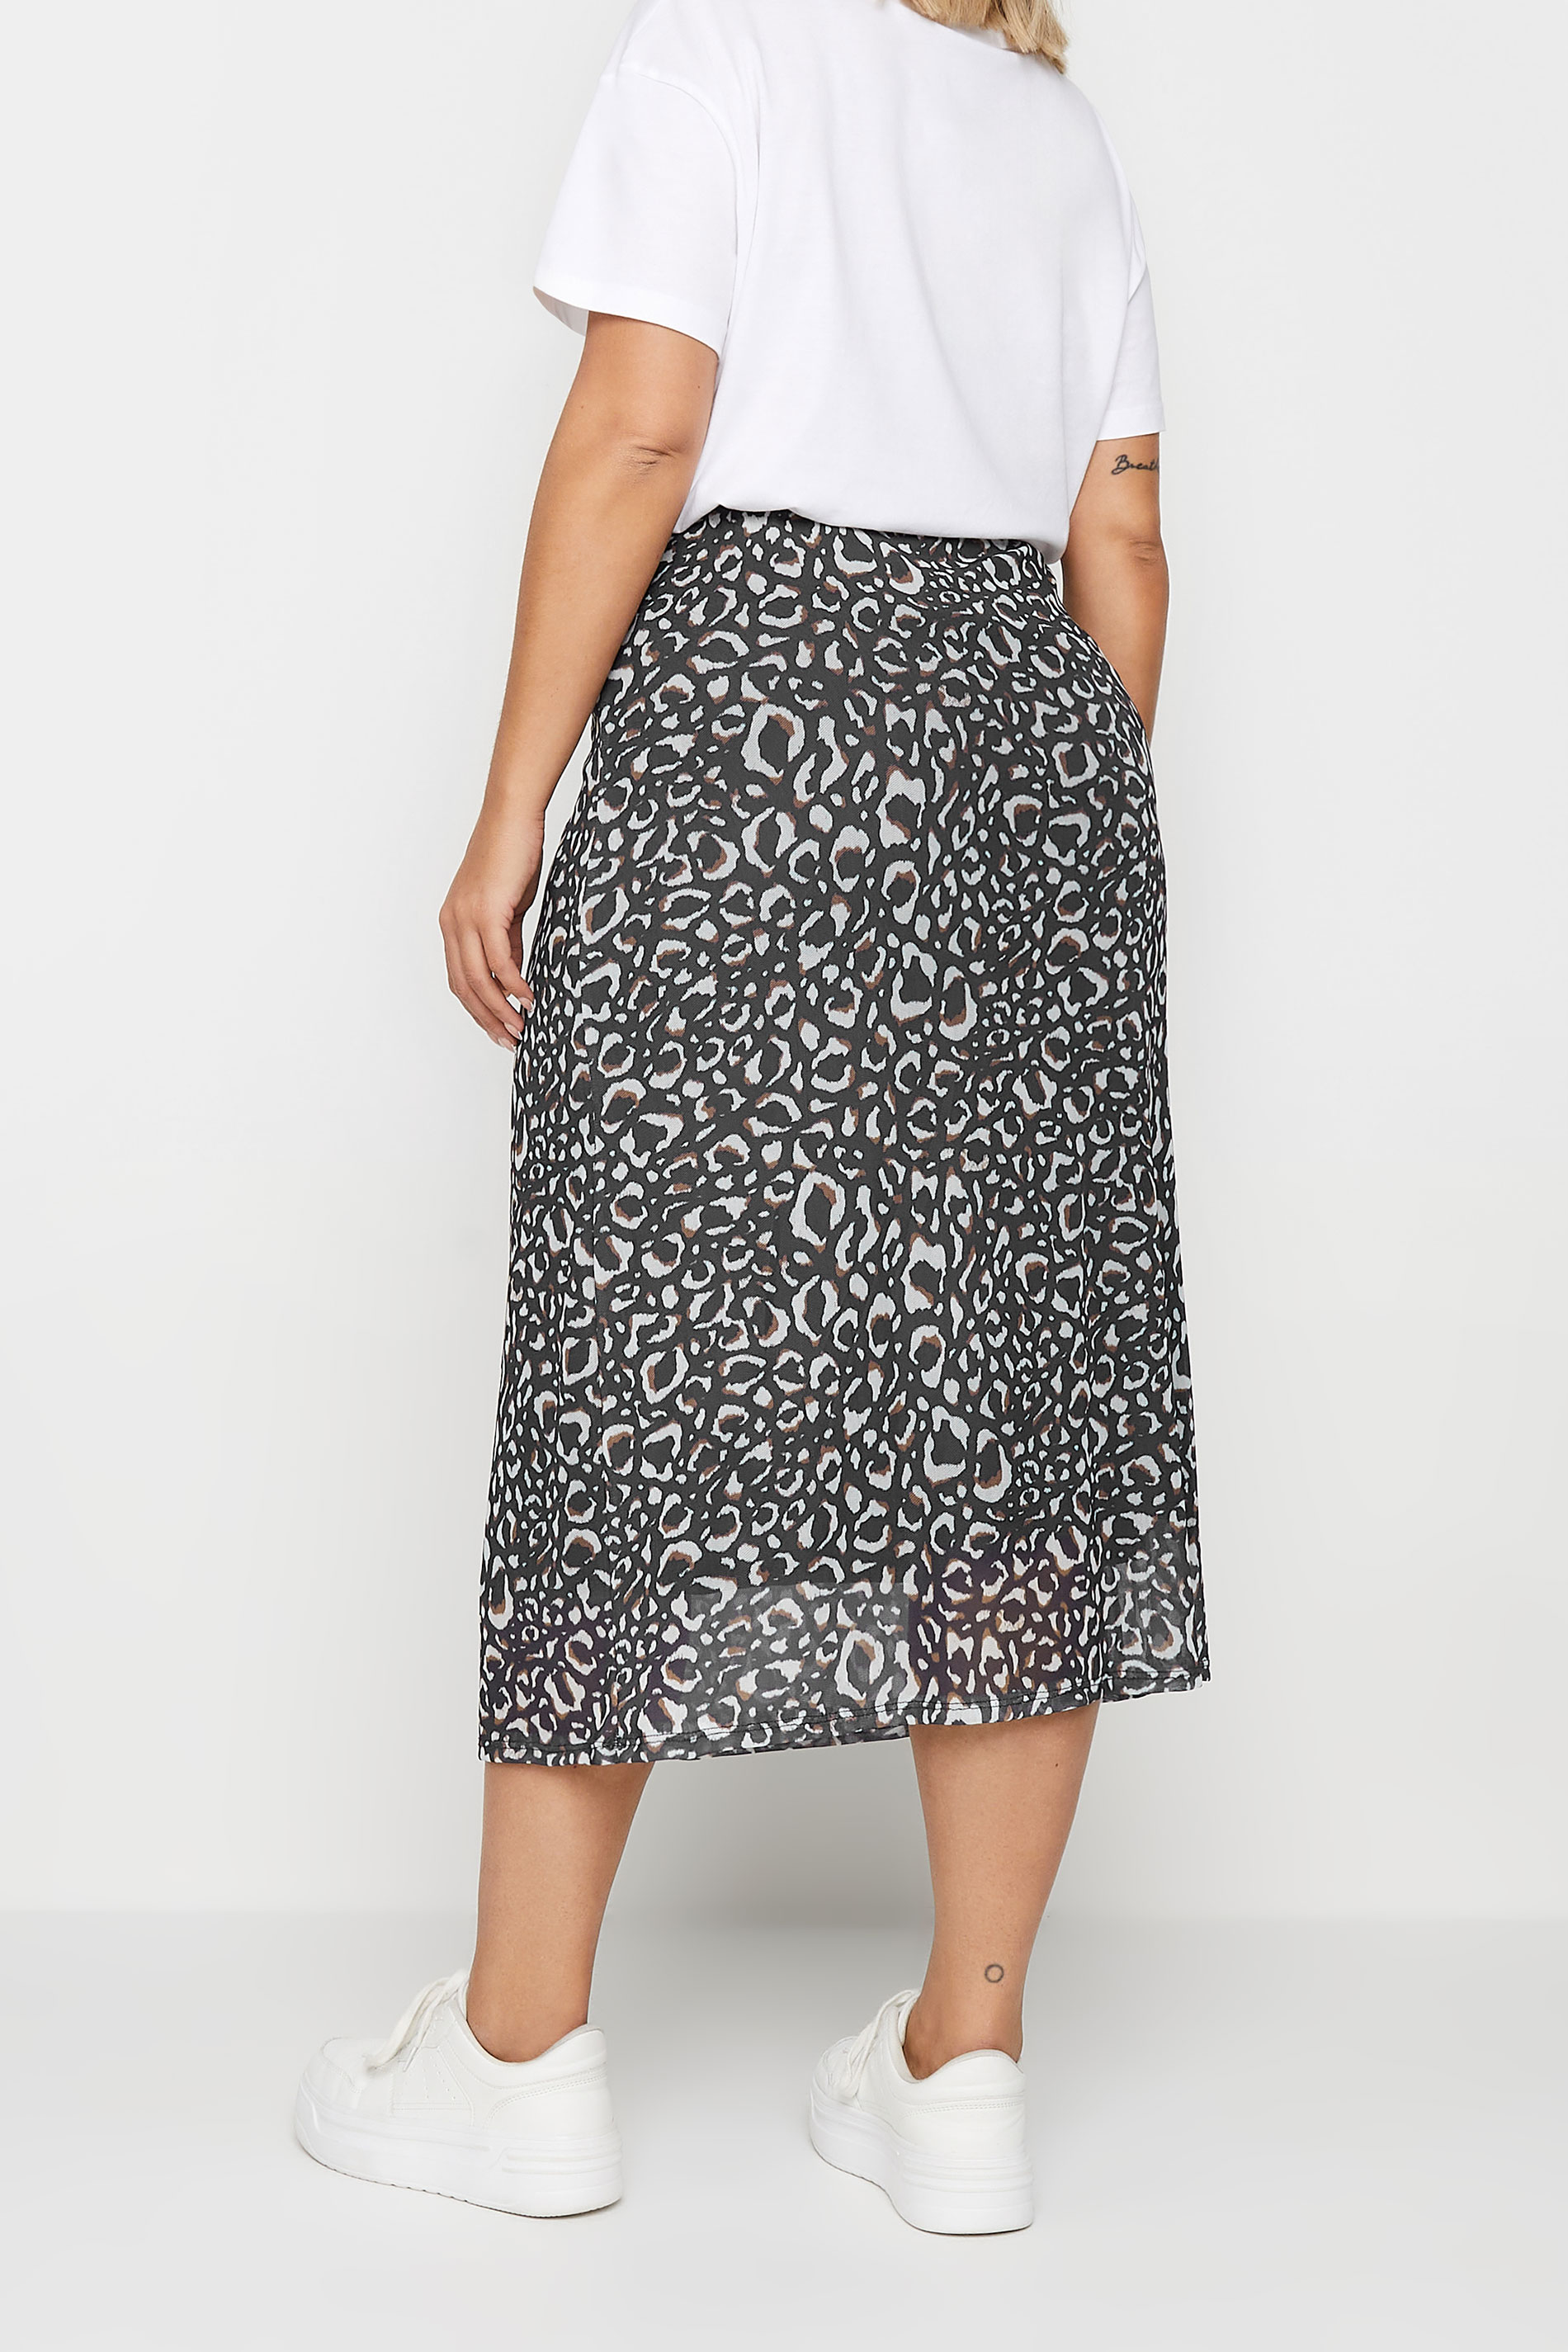 YOURS Curve Grey Leopard Print Mesh Maxi Skirt | Yours Clothing 3